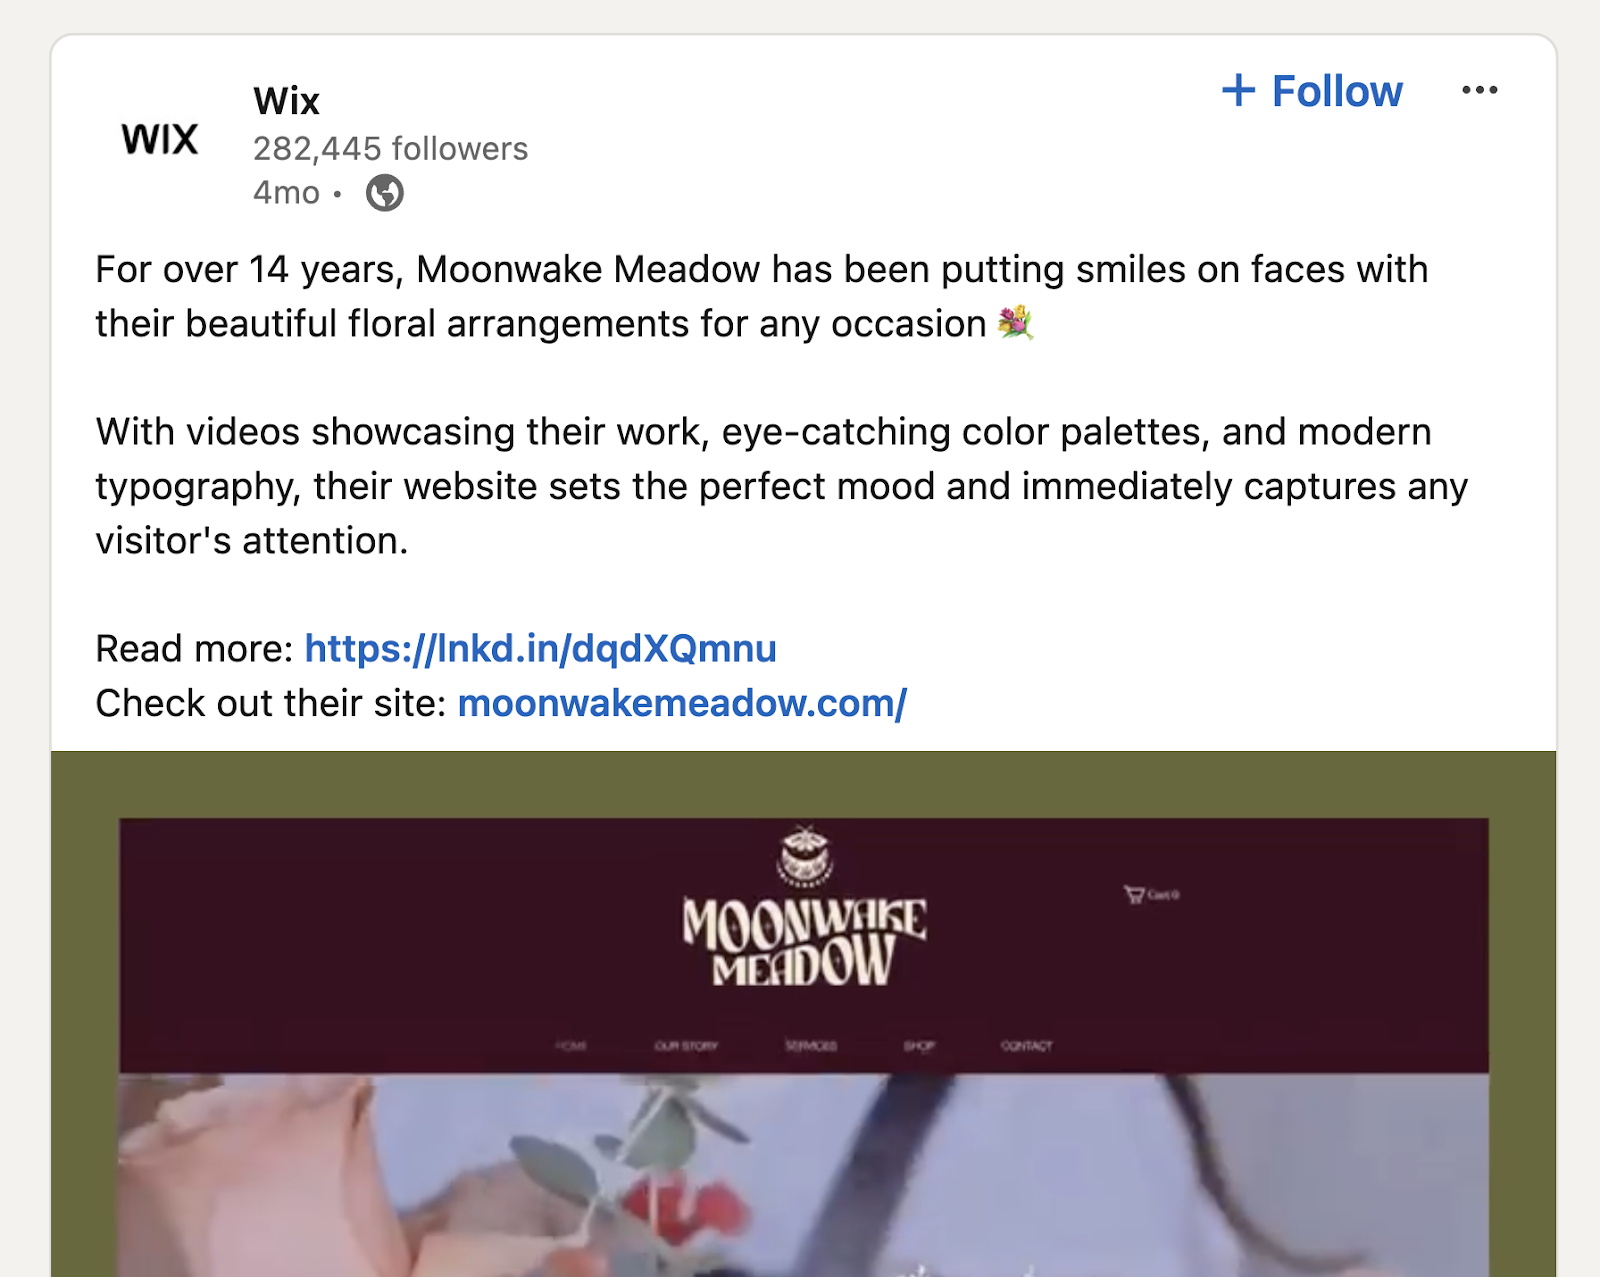 Wix LinkedIn post sharing a brand's story and a visual of their webpage created on the platform